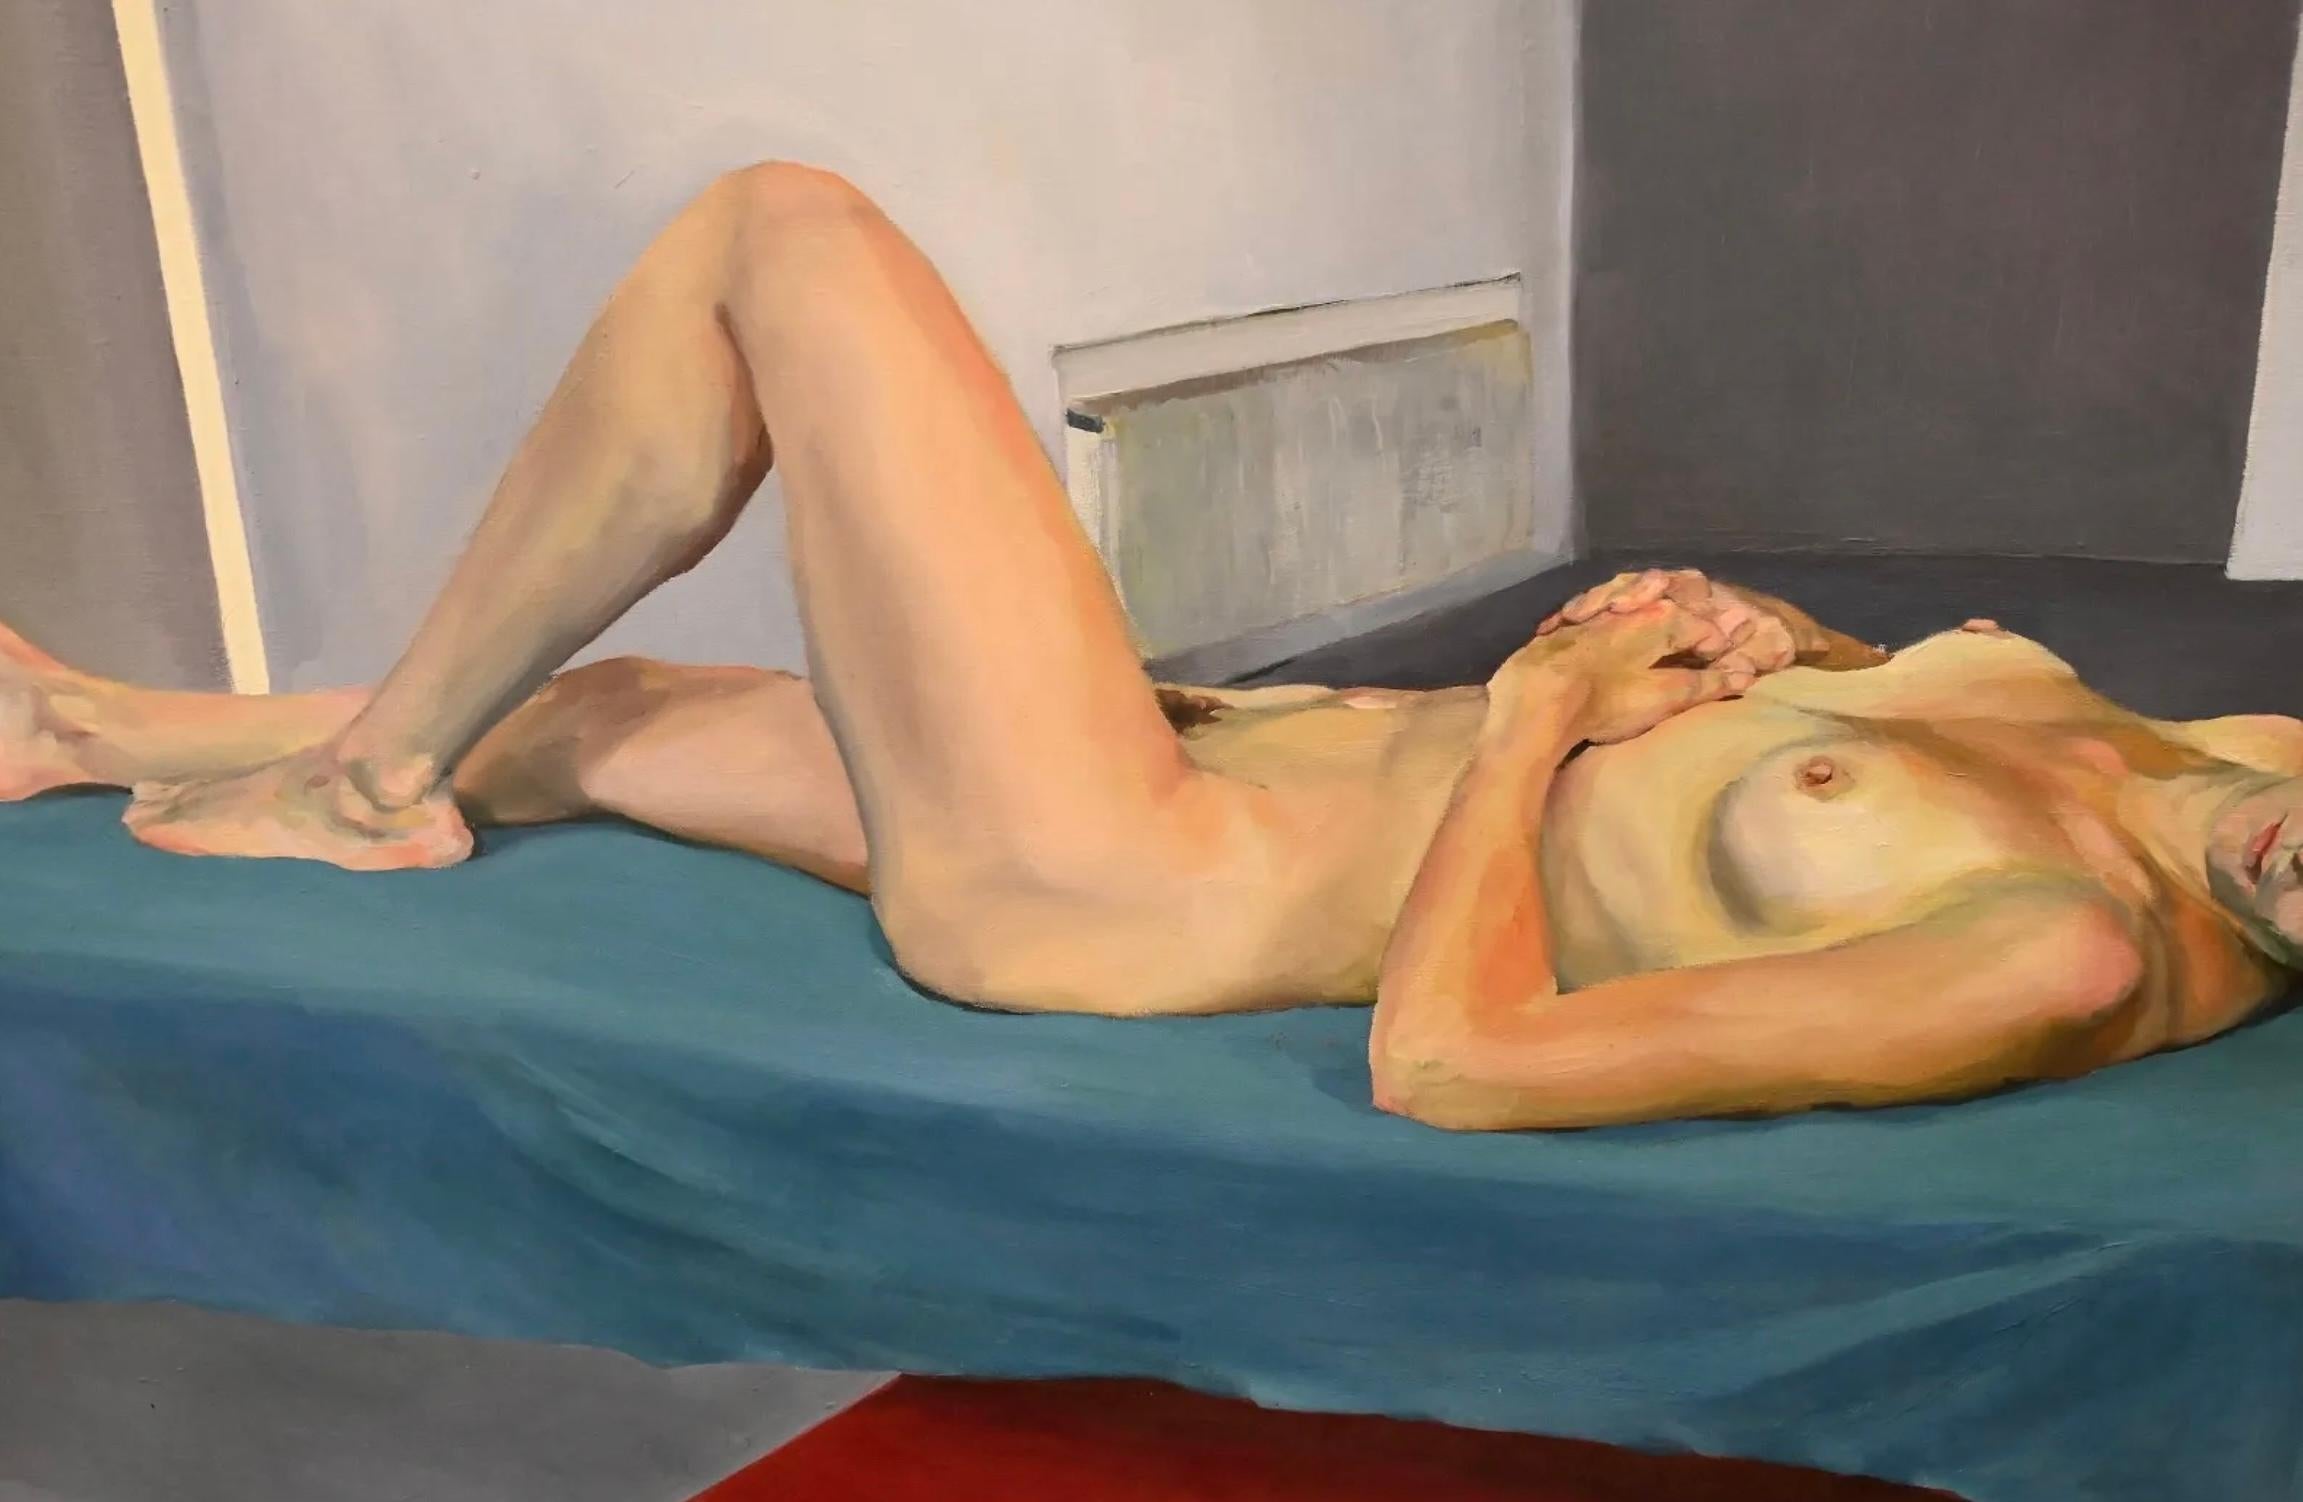 1999 Oil on Linen by Natalie Frank “Claire” Slade, London  In Good Condition For Sale In Palm Springs, CA